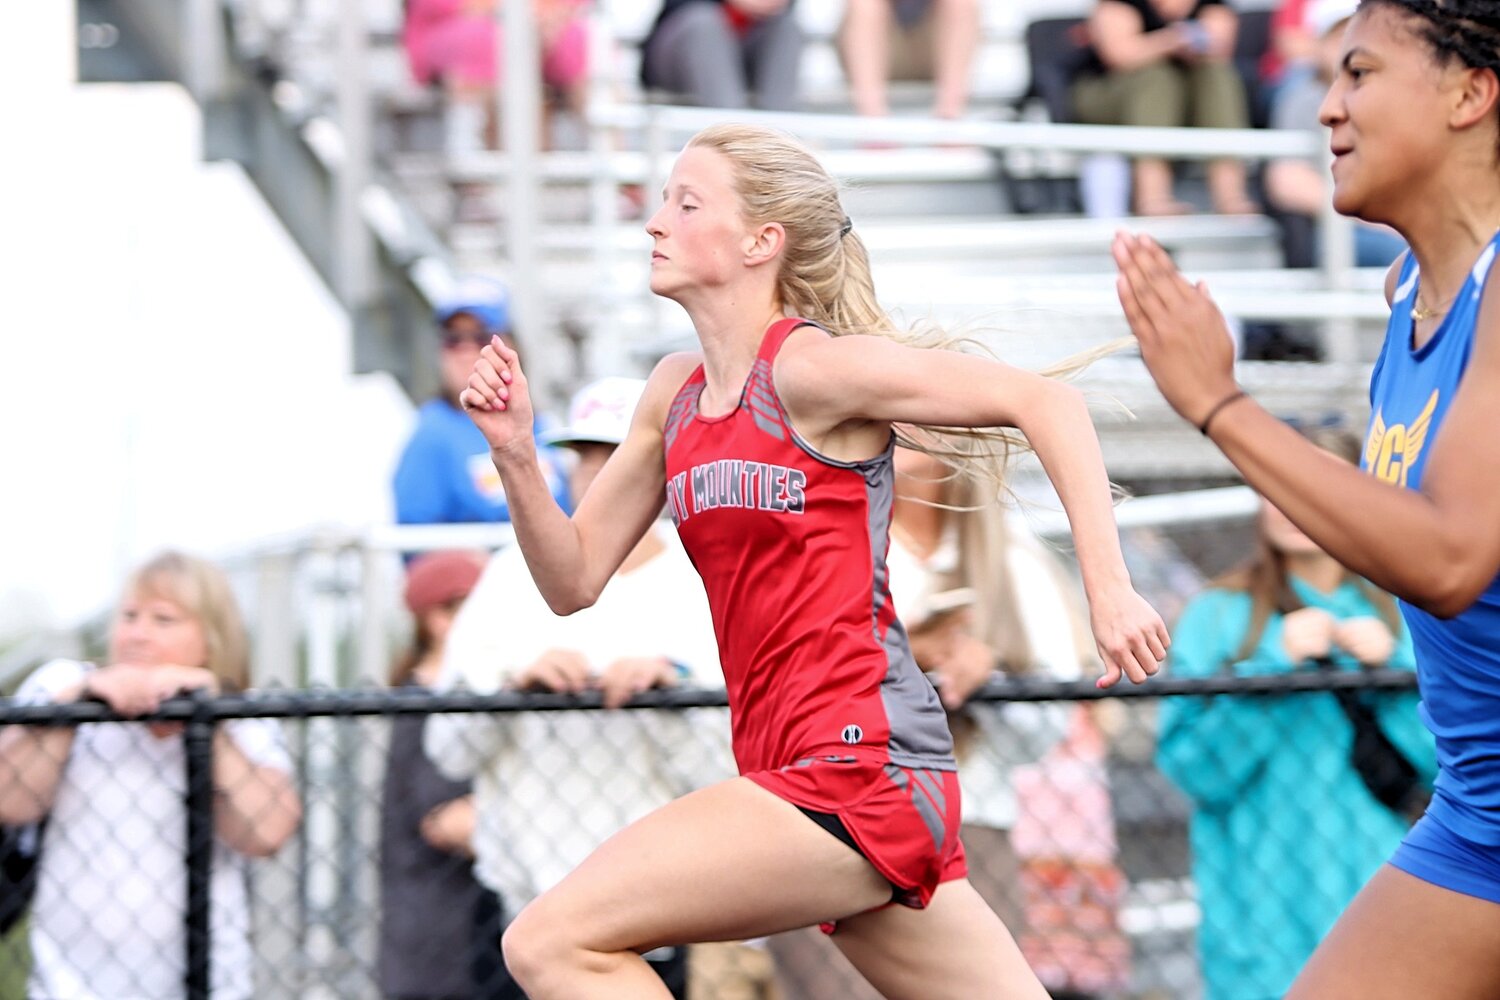 Southmont senior DeLorean Mason took first place in the 400 meter dash.